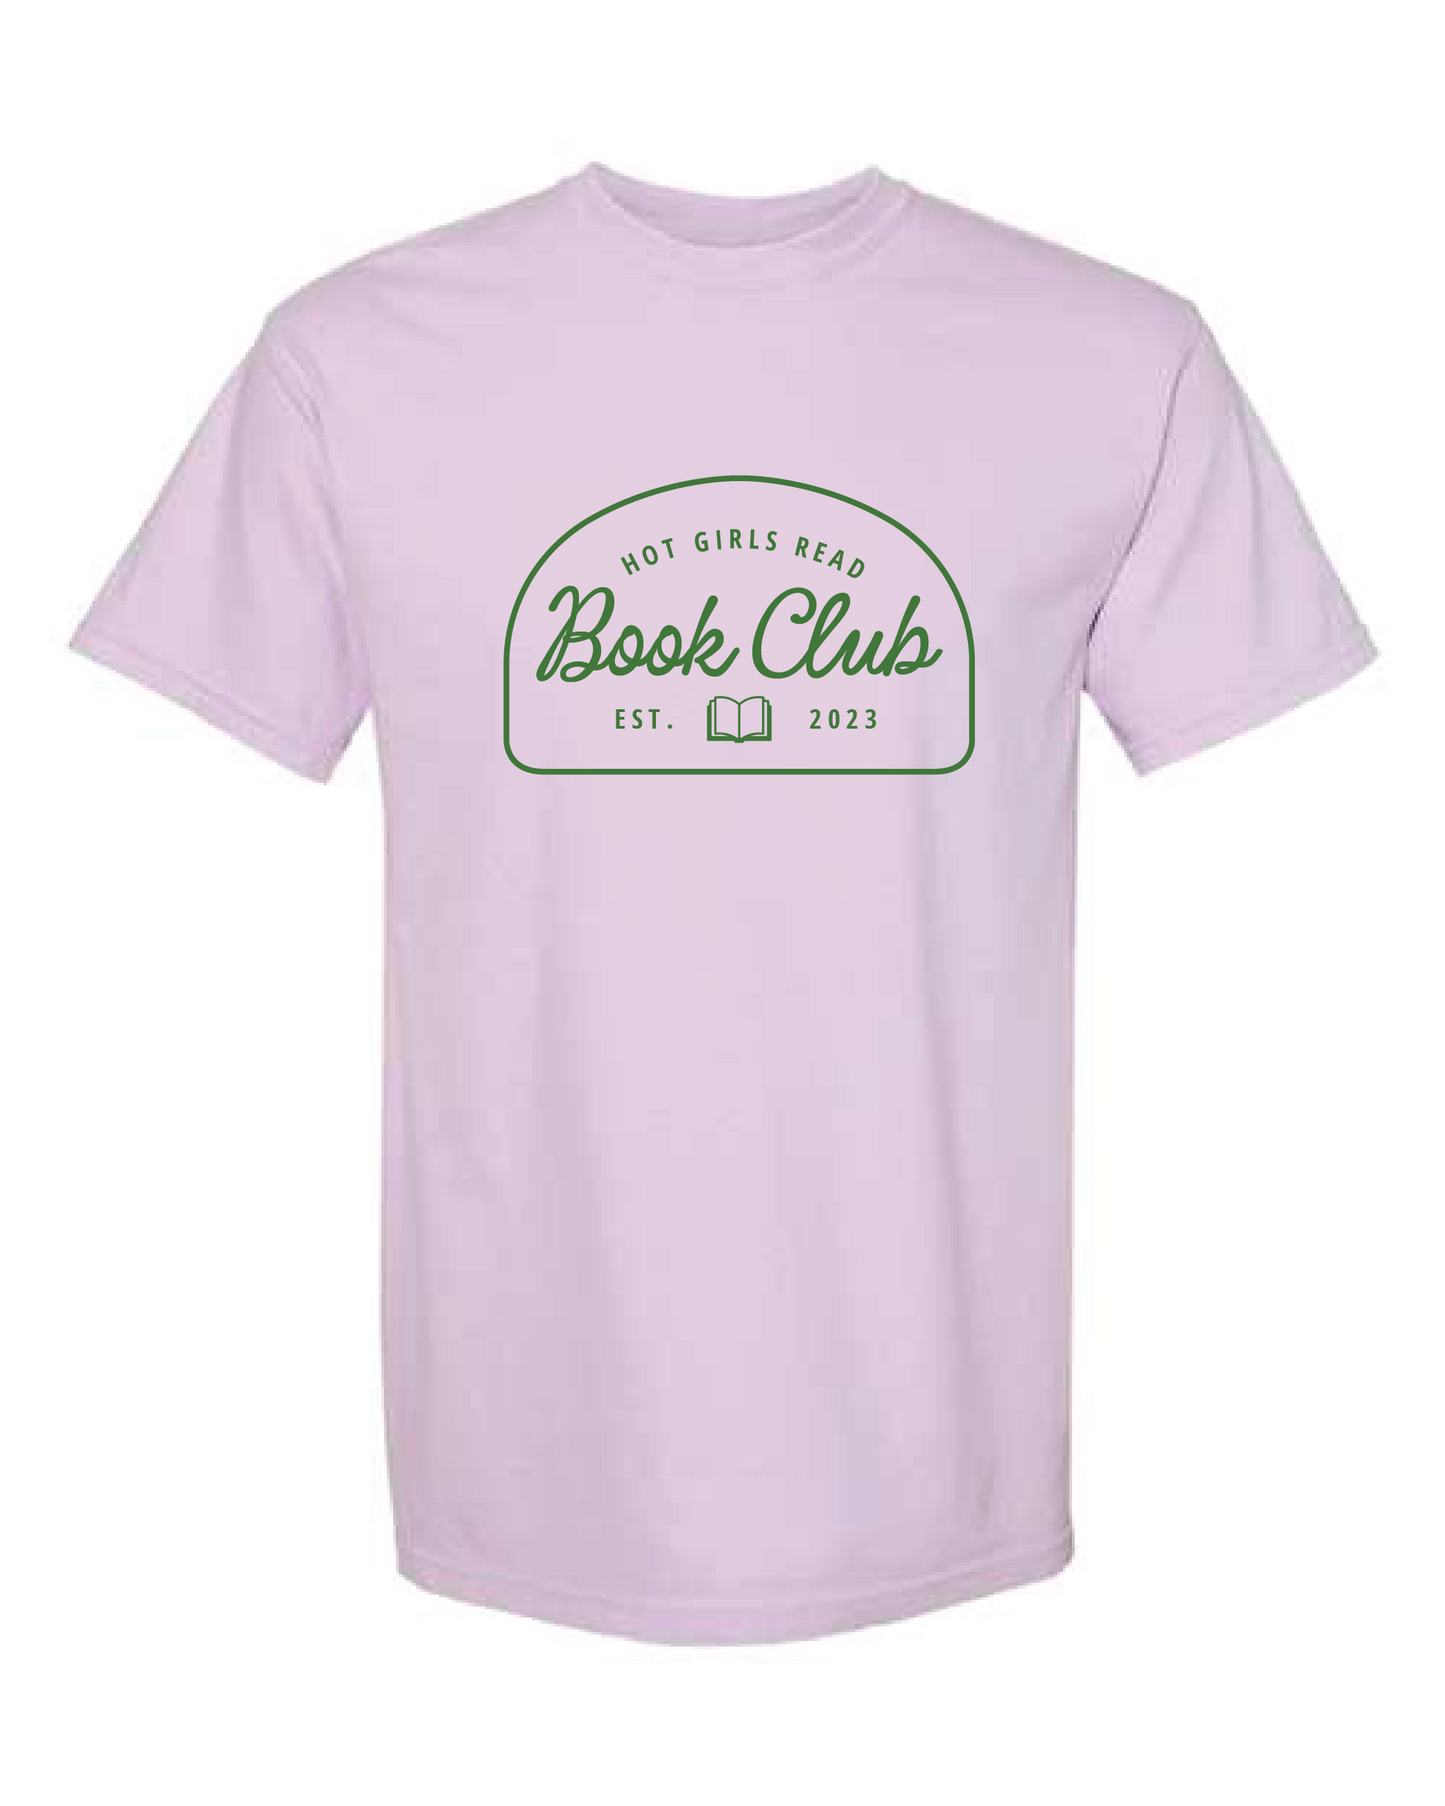 Lilac/Green Embroidered Hot Girls Read Short Sleeve Tee